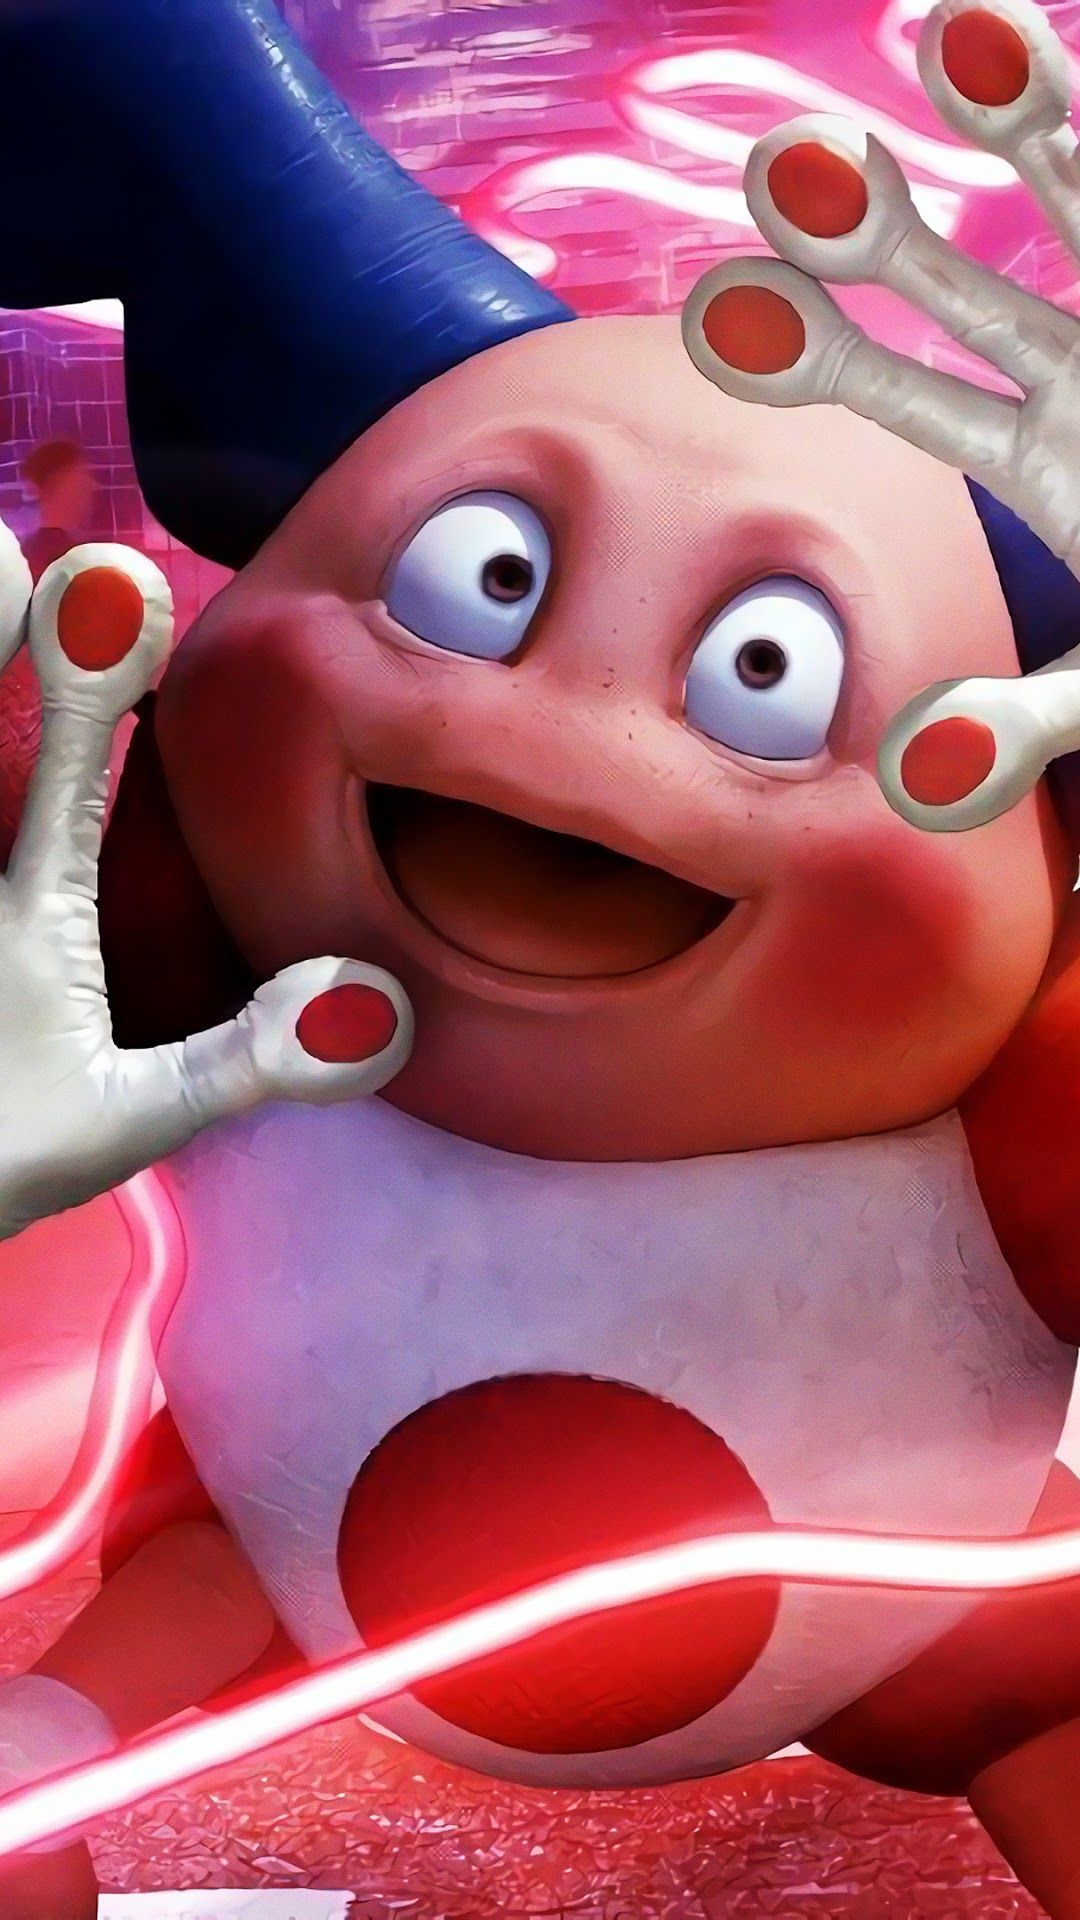 Mr. Mime, Pokemon: Detective Pikachu phone HD Wallpaper, Image, Background, Photo and Picture